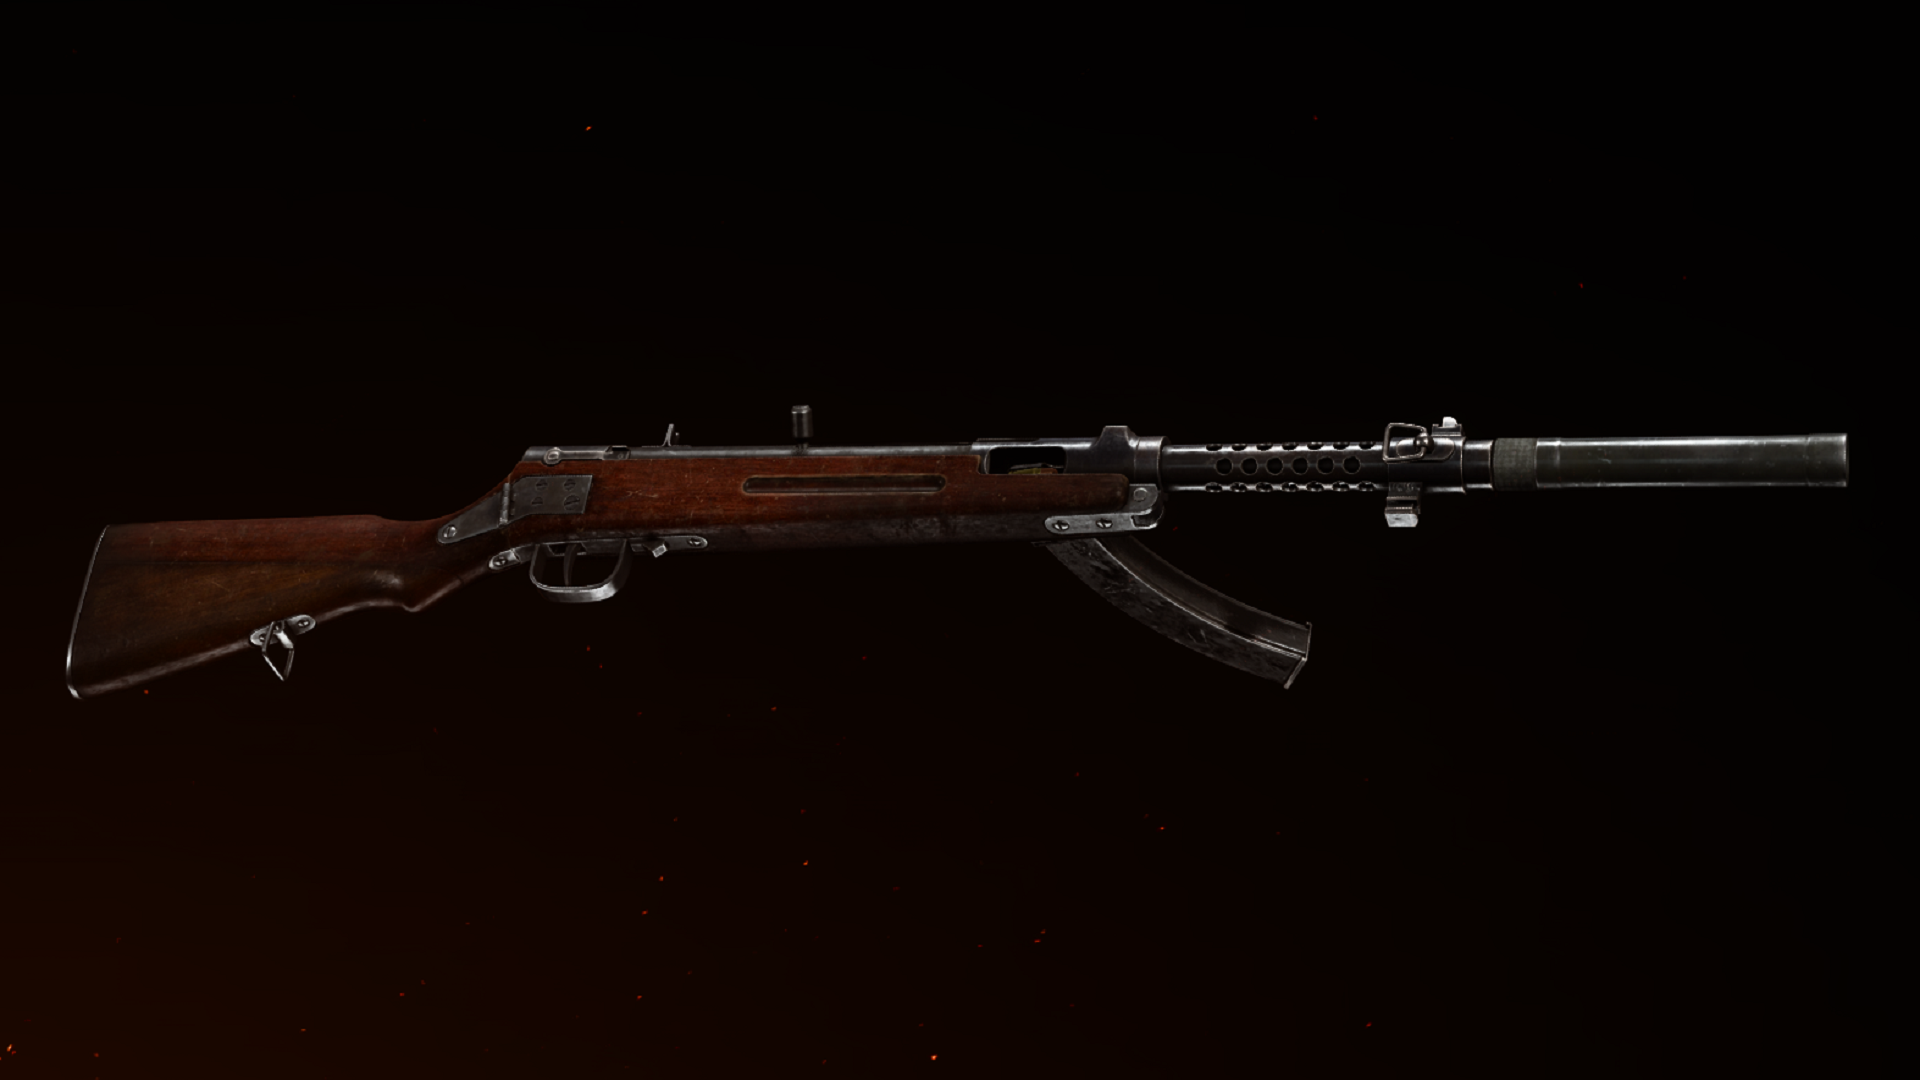 The Type 100 SMG in Warzone